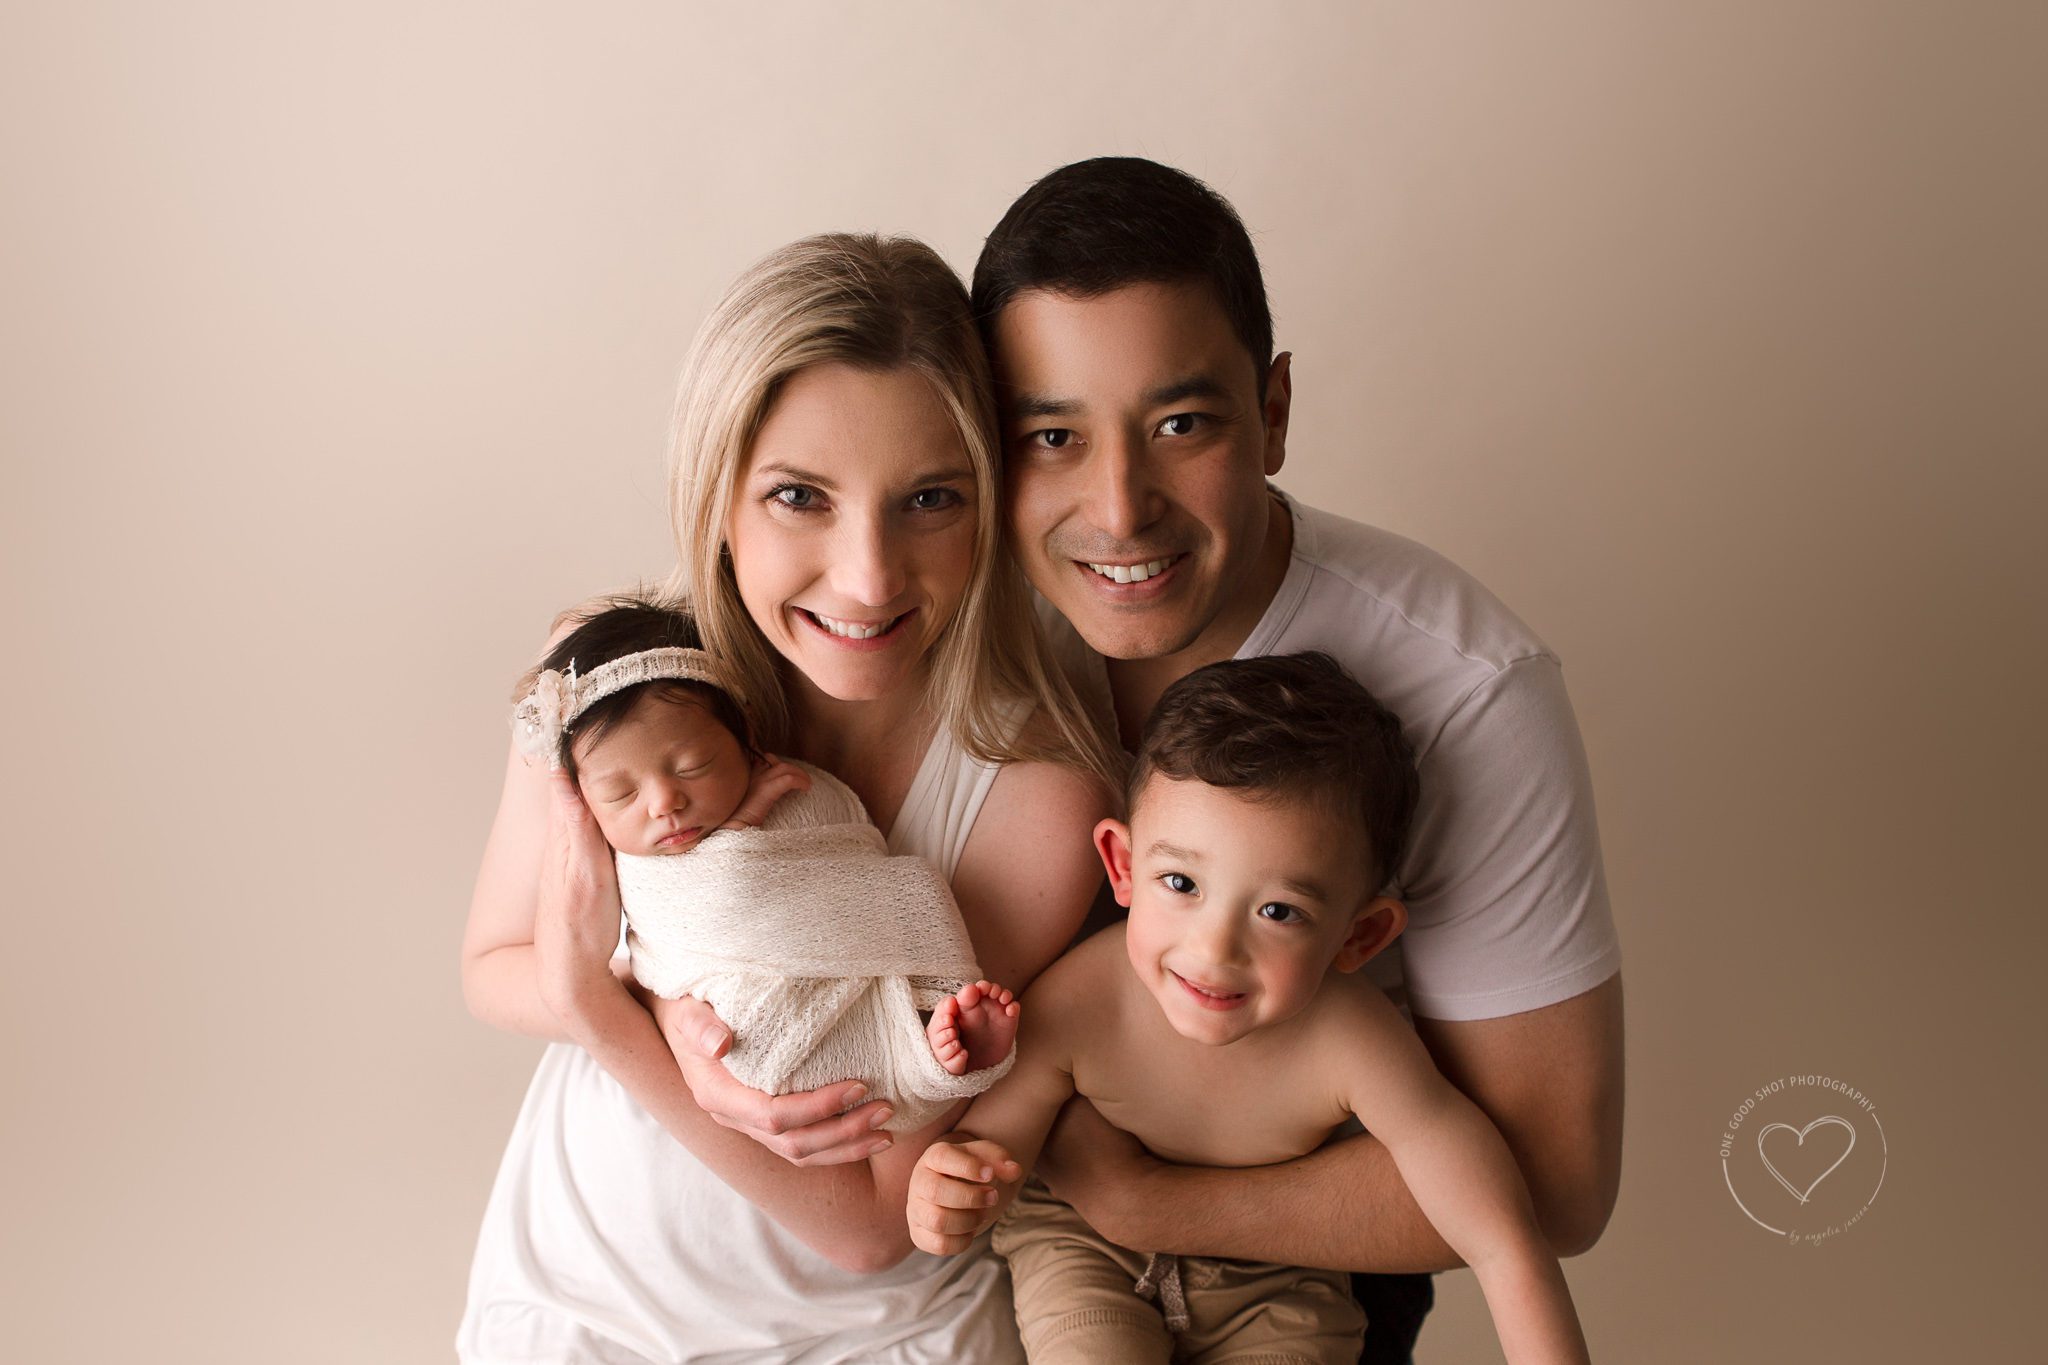 Fresno newborn family photographer, first family photo, big brother smiling, baby sister